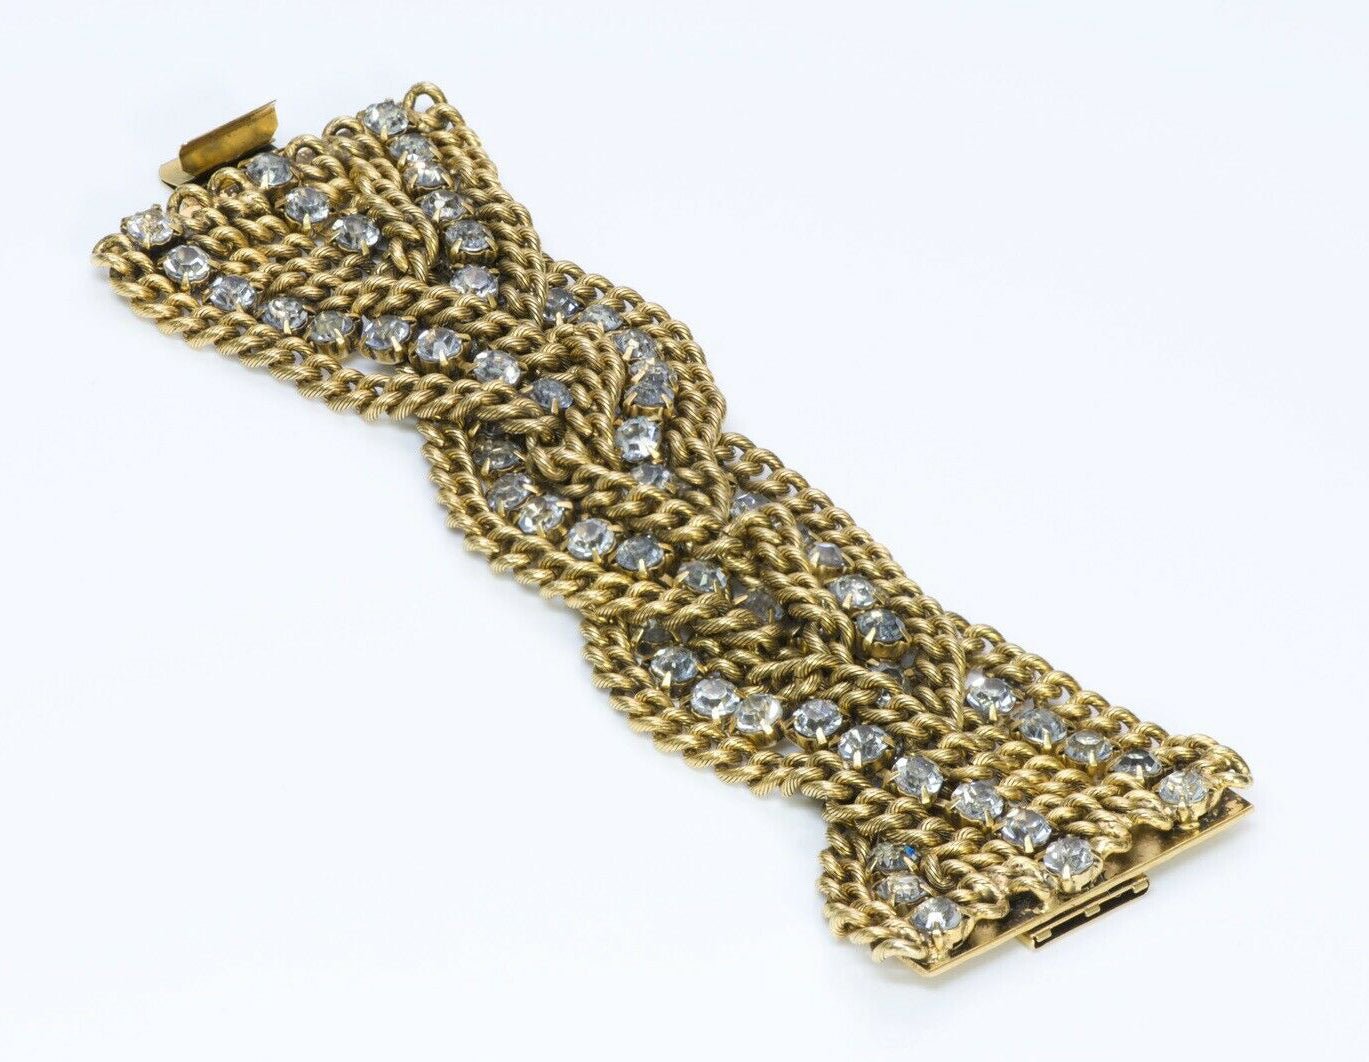 Vintage French 1980’s Wide Woven Crystal Chain Bracelet